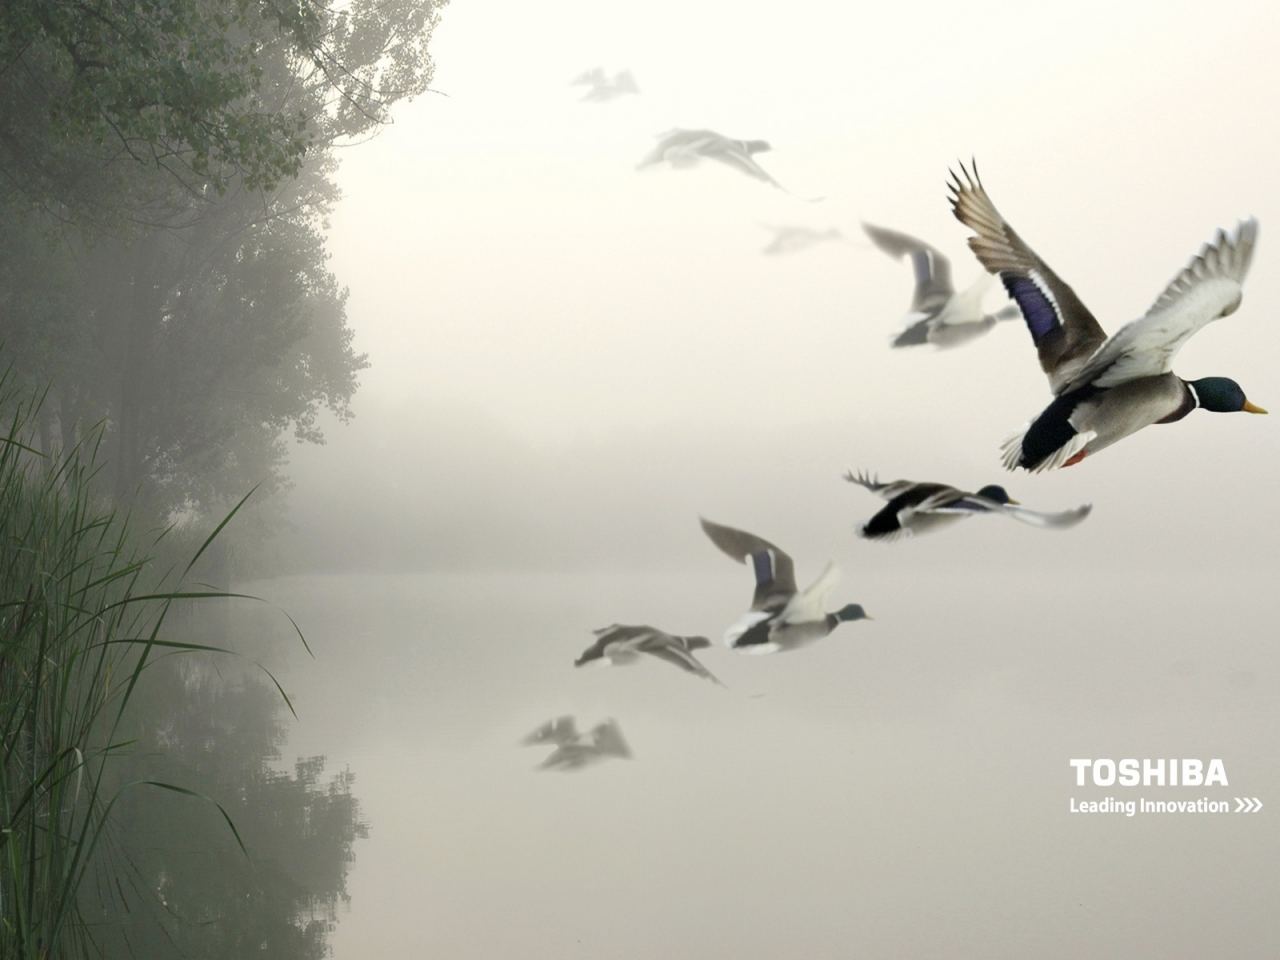 Toshiba birds in the air for 1280 x 960 resolution